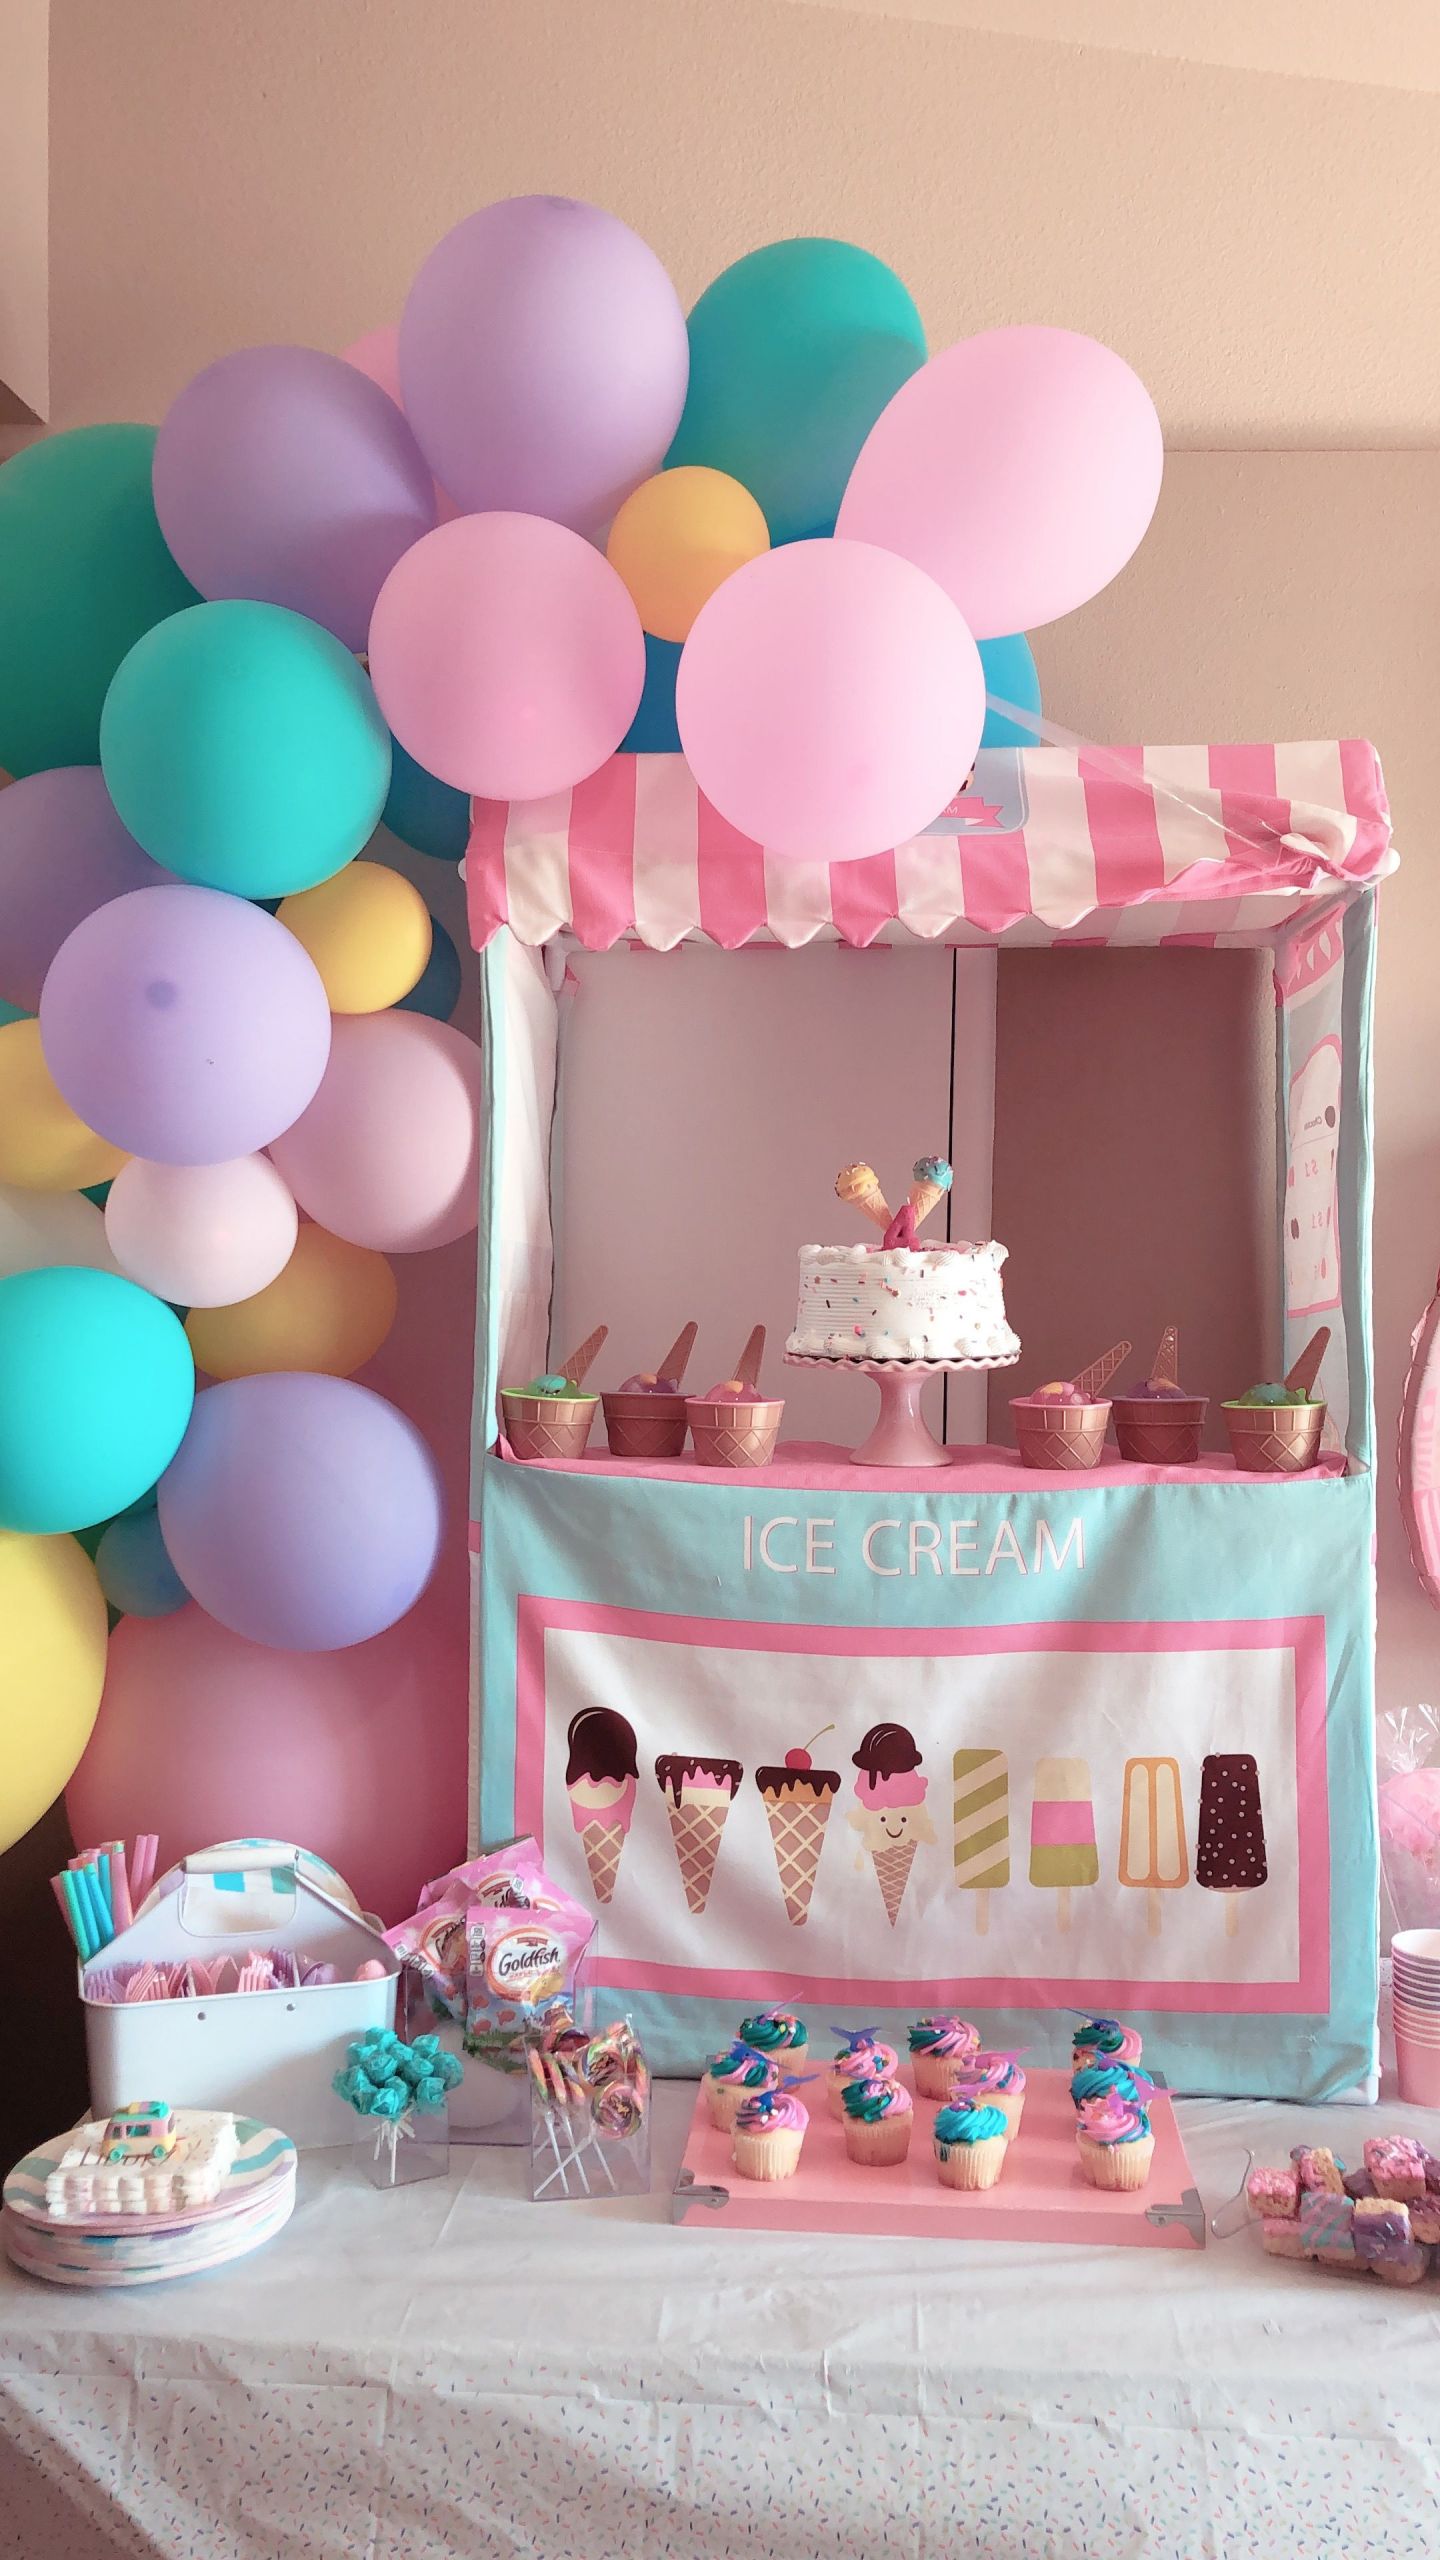 Birthday Party Ideas For 4 Year Old Daughter
 Ice cream birthday party for my 4 year old